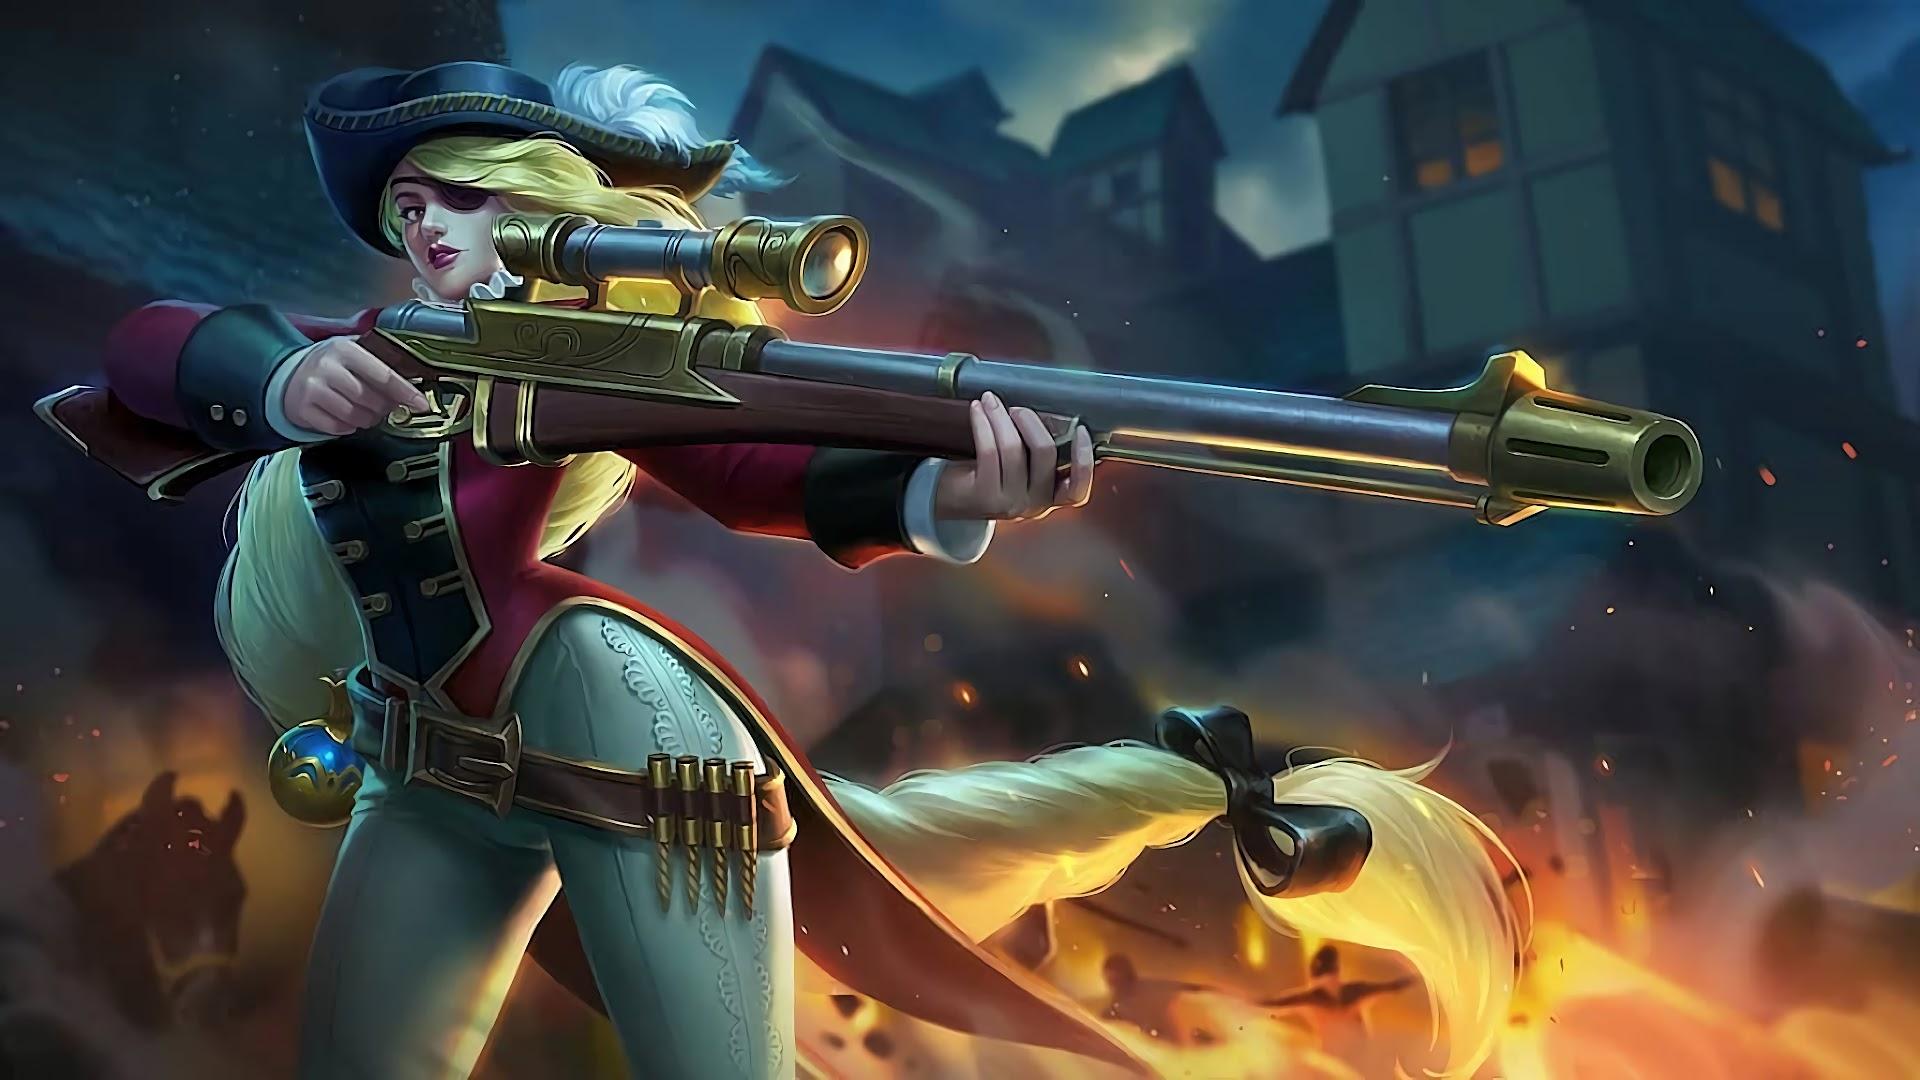 Wanwan and Lesley ML Hero Marksman Painful in Mobile Legends